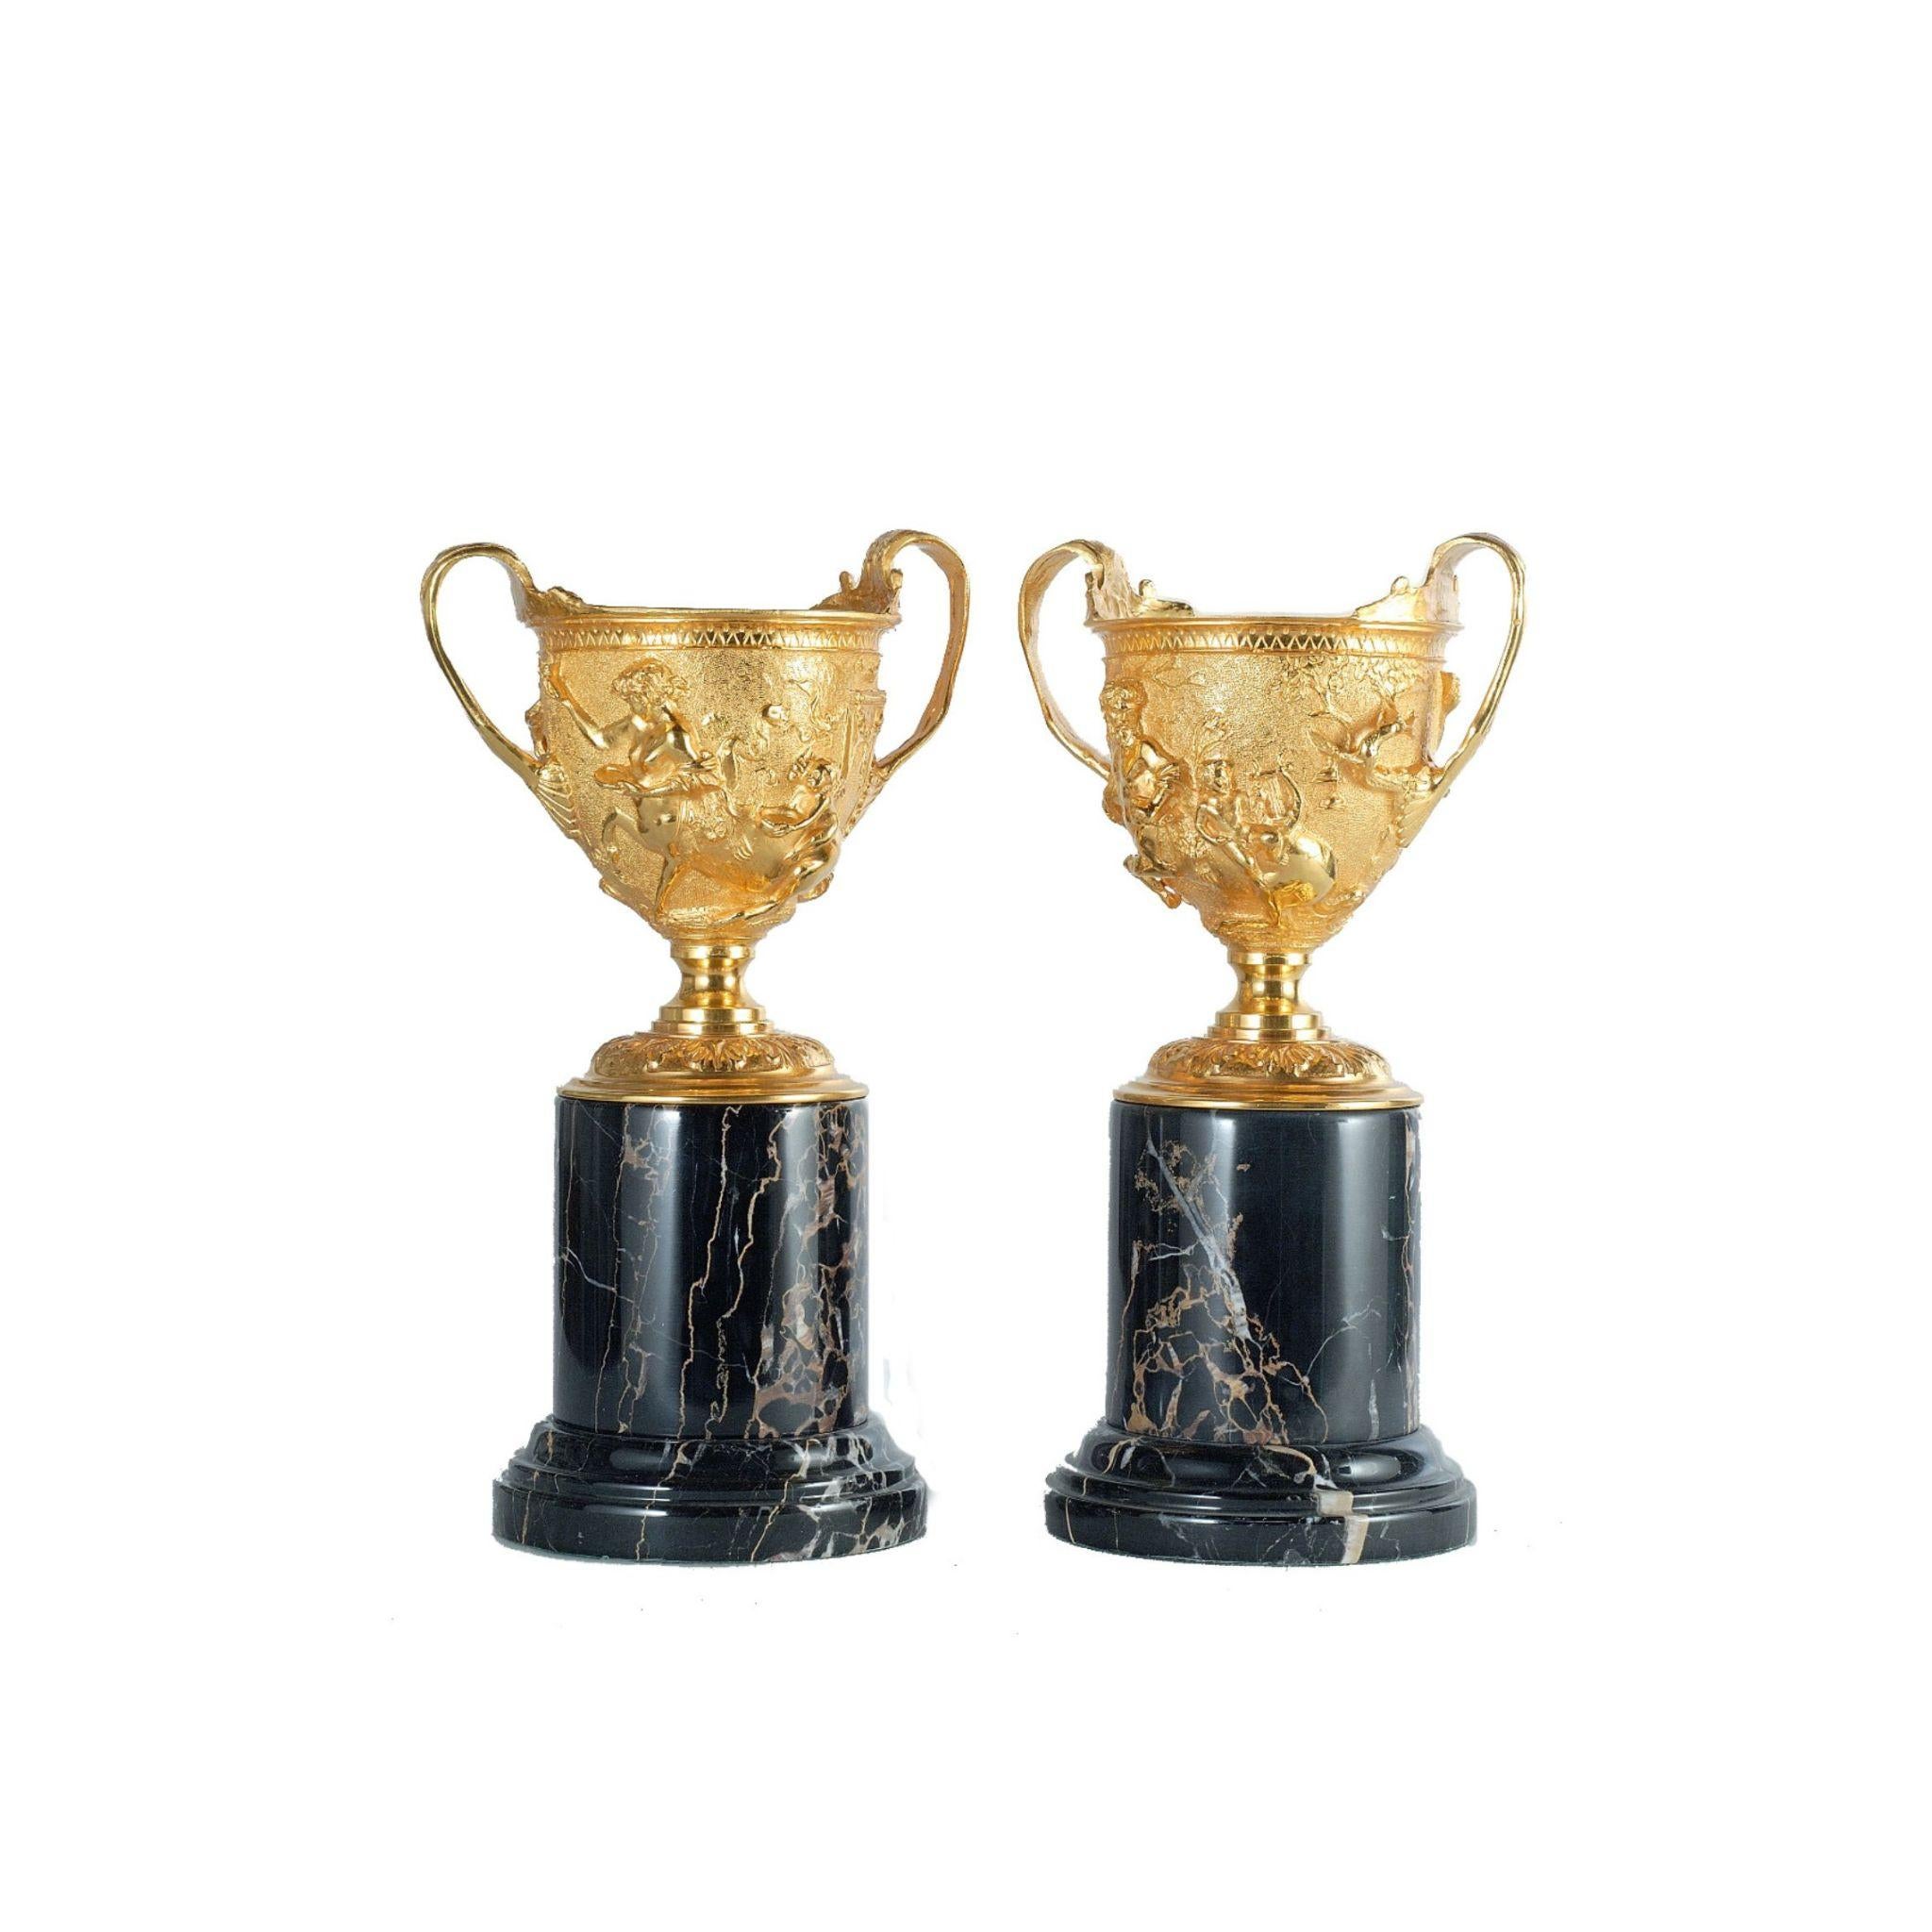 Add some sophistication and elegance to your living space with our decorated satin brass cup on a black marble base. Perfect for holding small items or just as a decorative piece, this accessory will enhance your decor. Shop now and enjoy a more